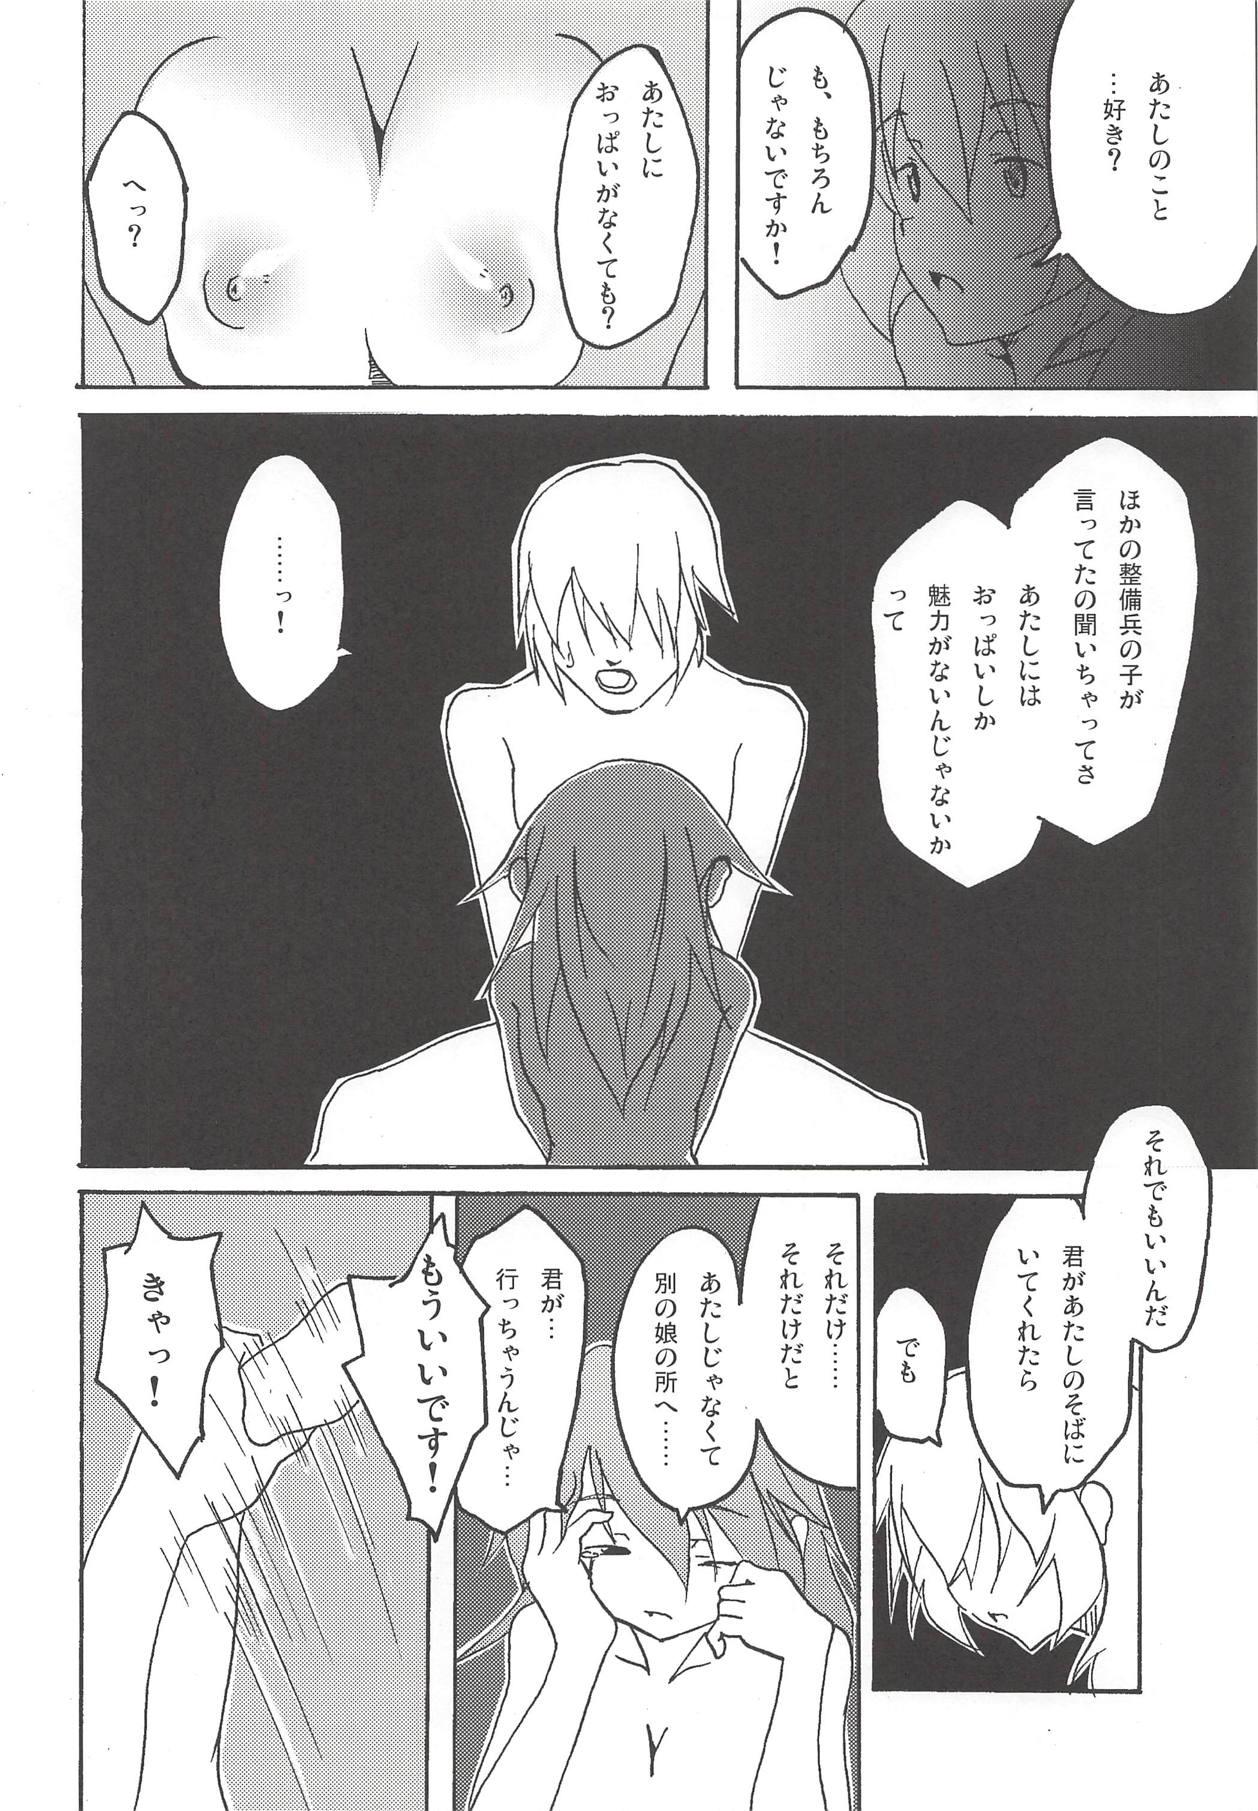 Gay Interracial Glamorous Days - Strike witches Bisex - Page 13